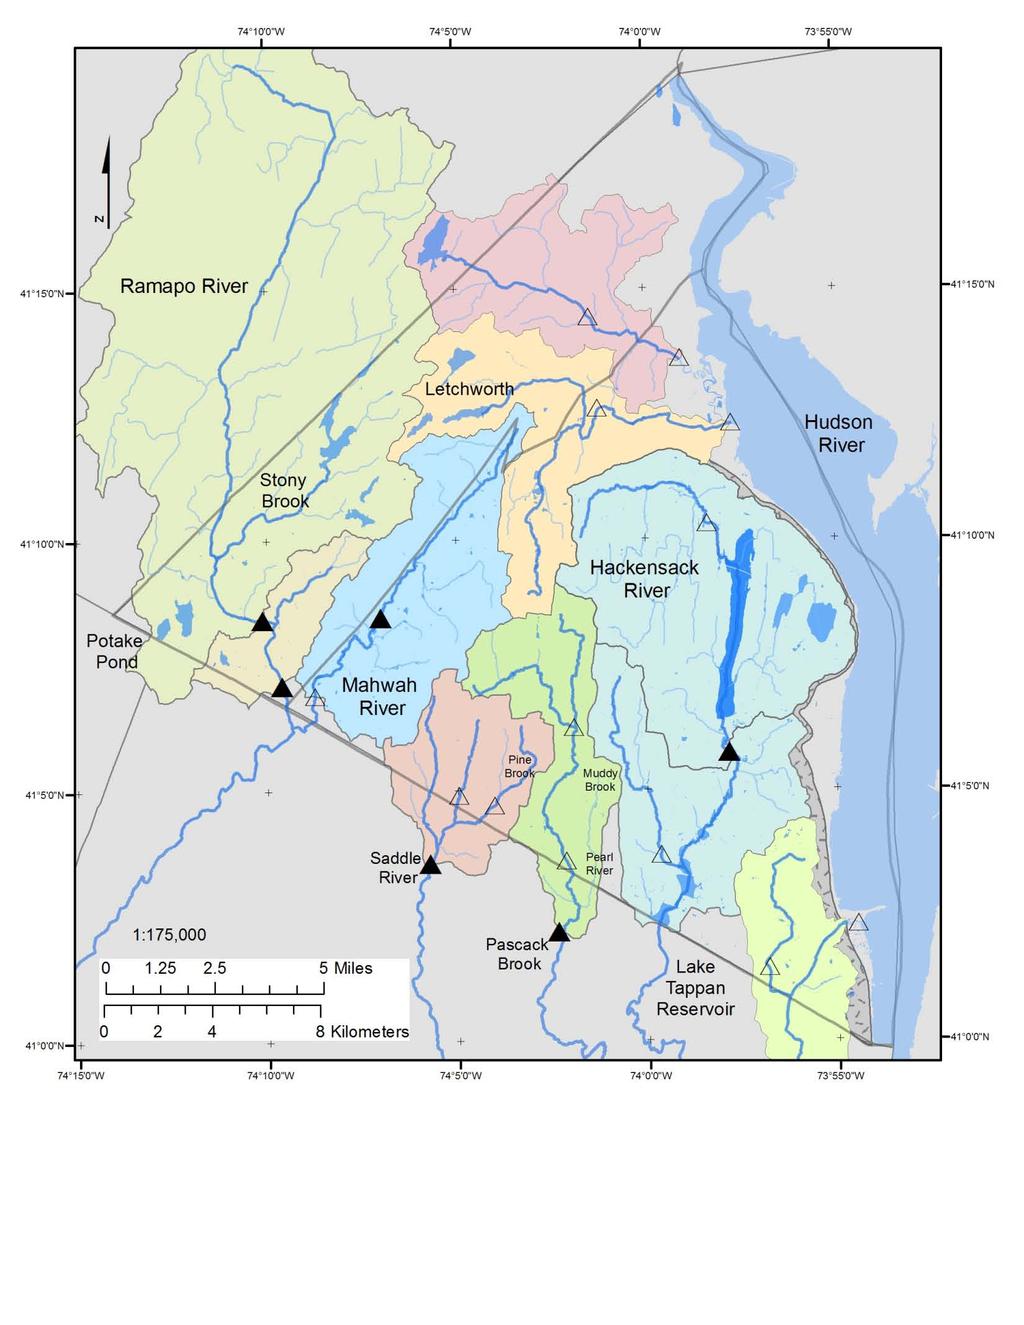 Subject to Permits Water Sources Rockland County, NY -Lake DeForest Reservoir -Alluvial Aquifers Ramapo and Mahwah Valleys